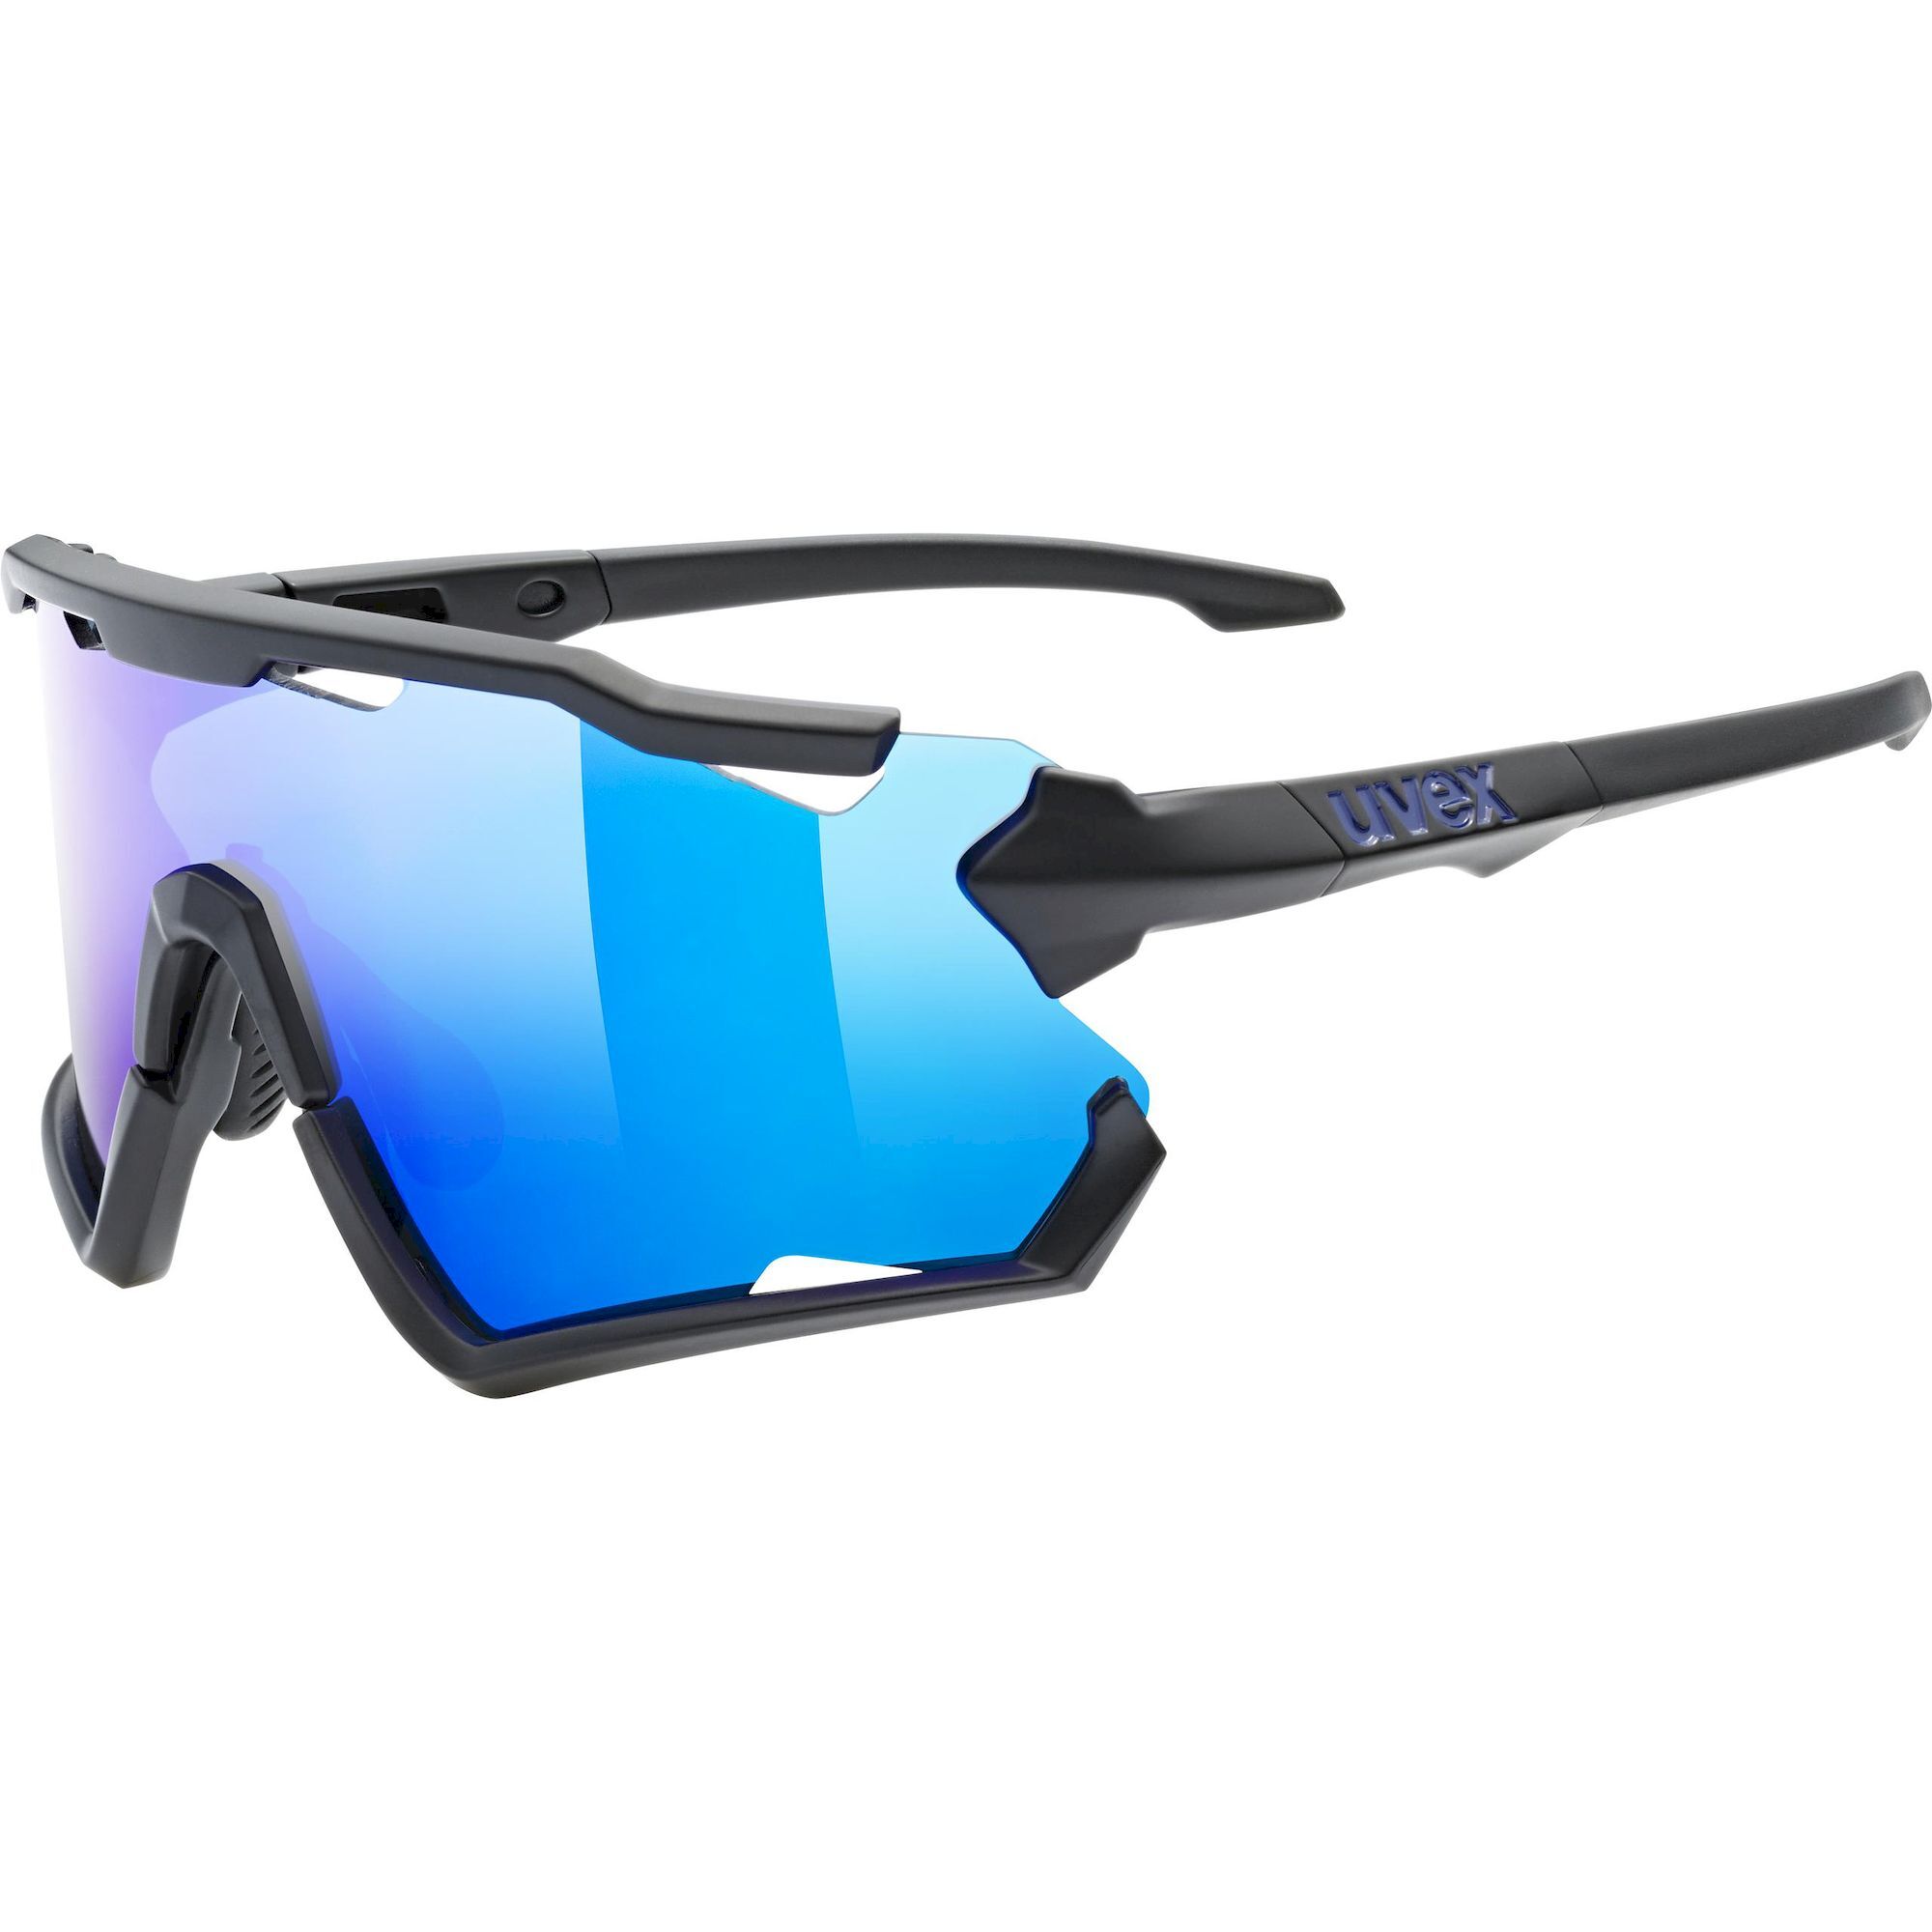 Uvex Sportstyle 228 - Cycling sunglasses